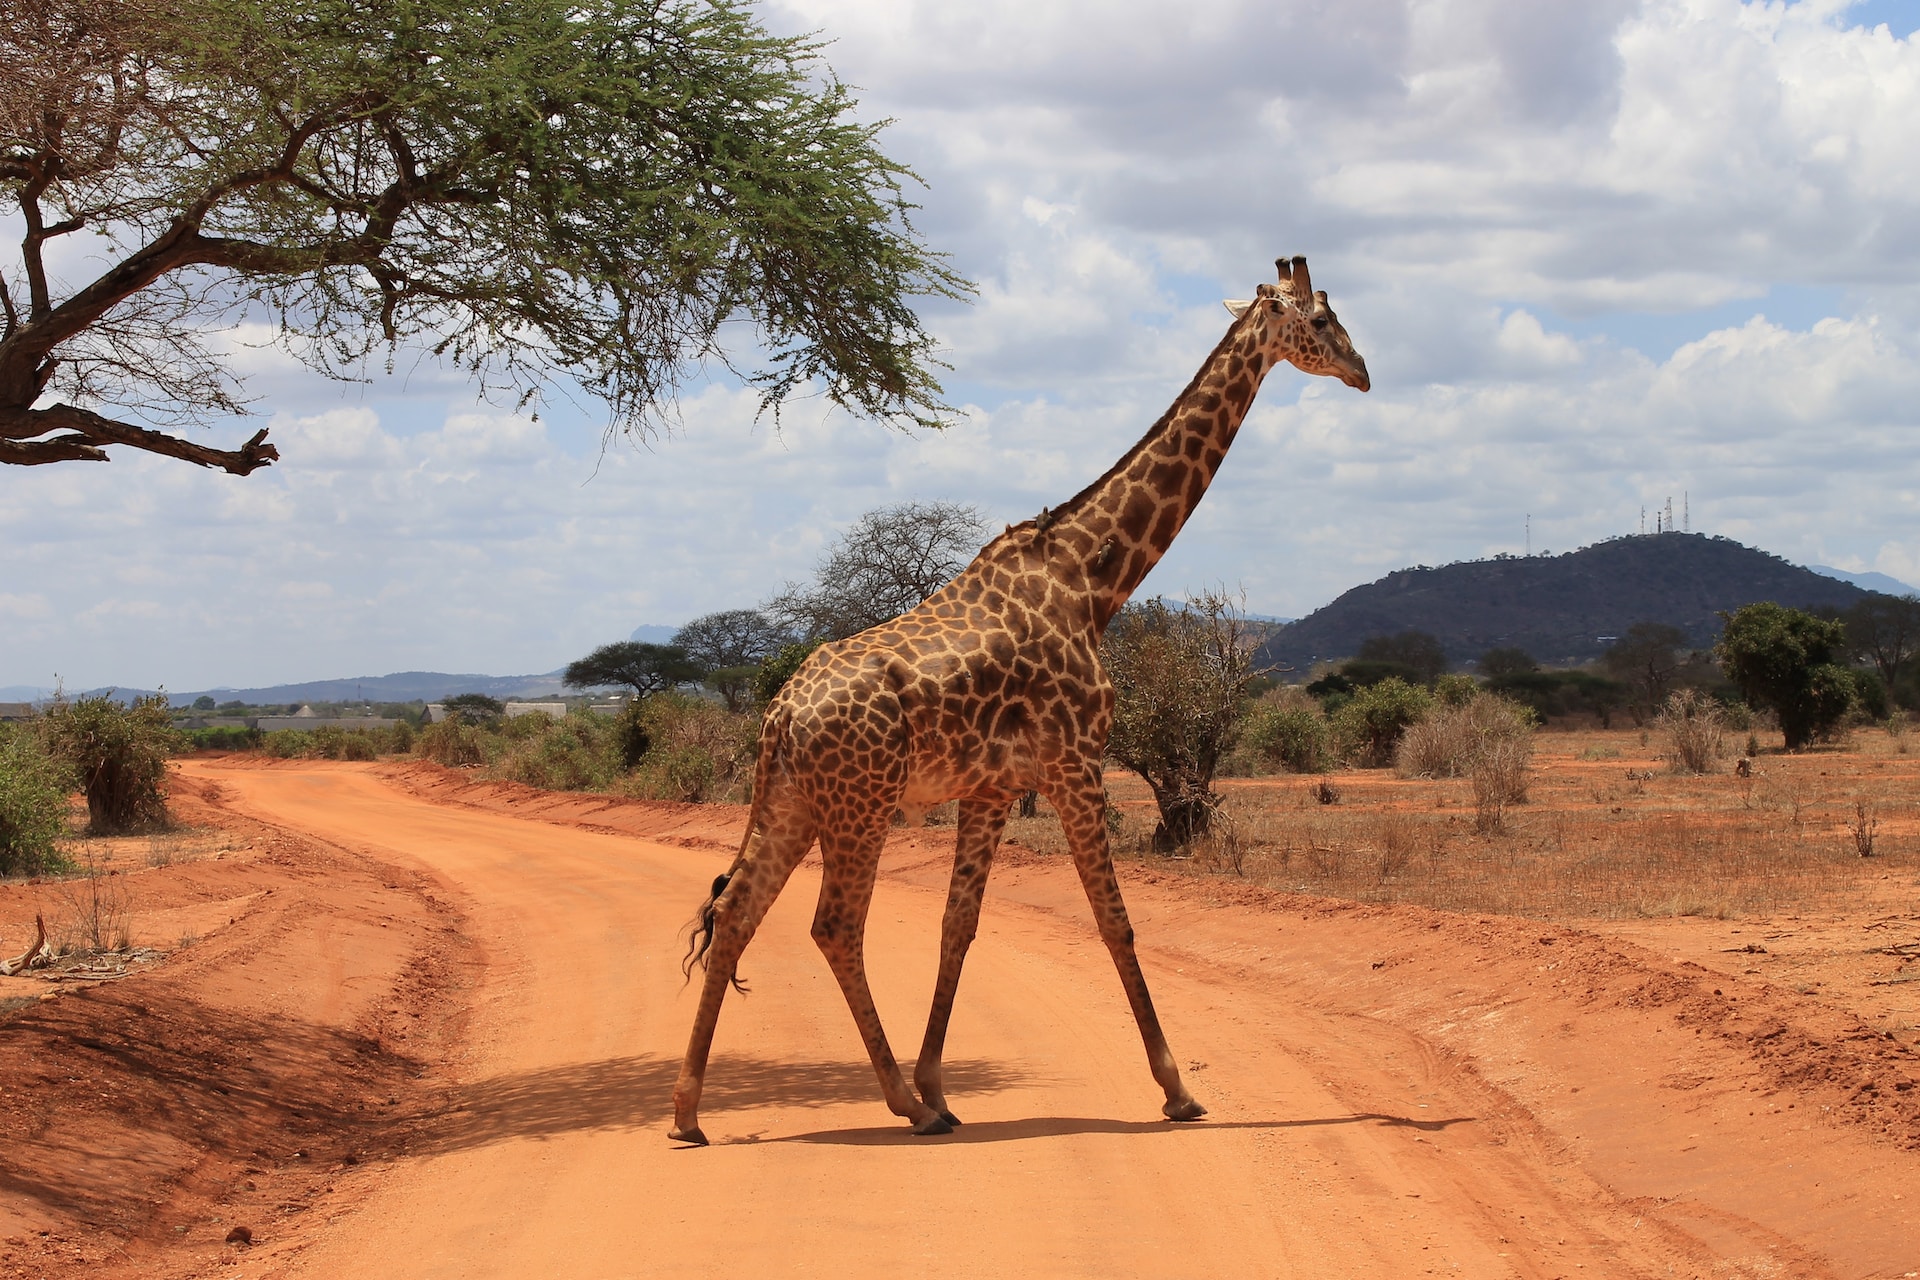 10 Things You Didn’t Know About Giraffes (Facts and Video)